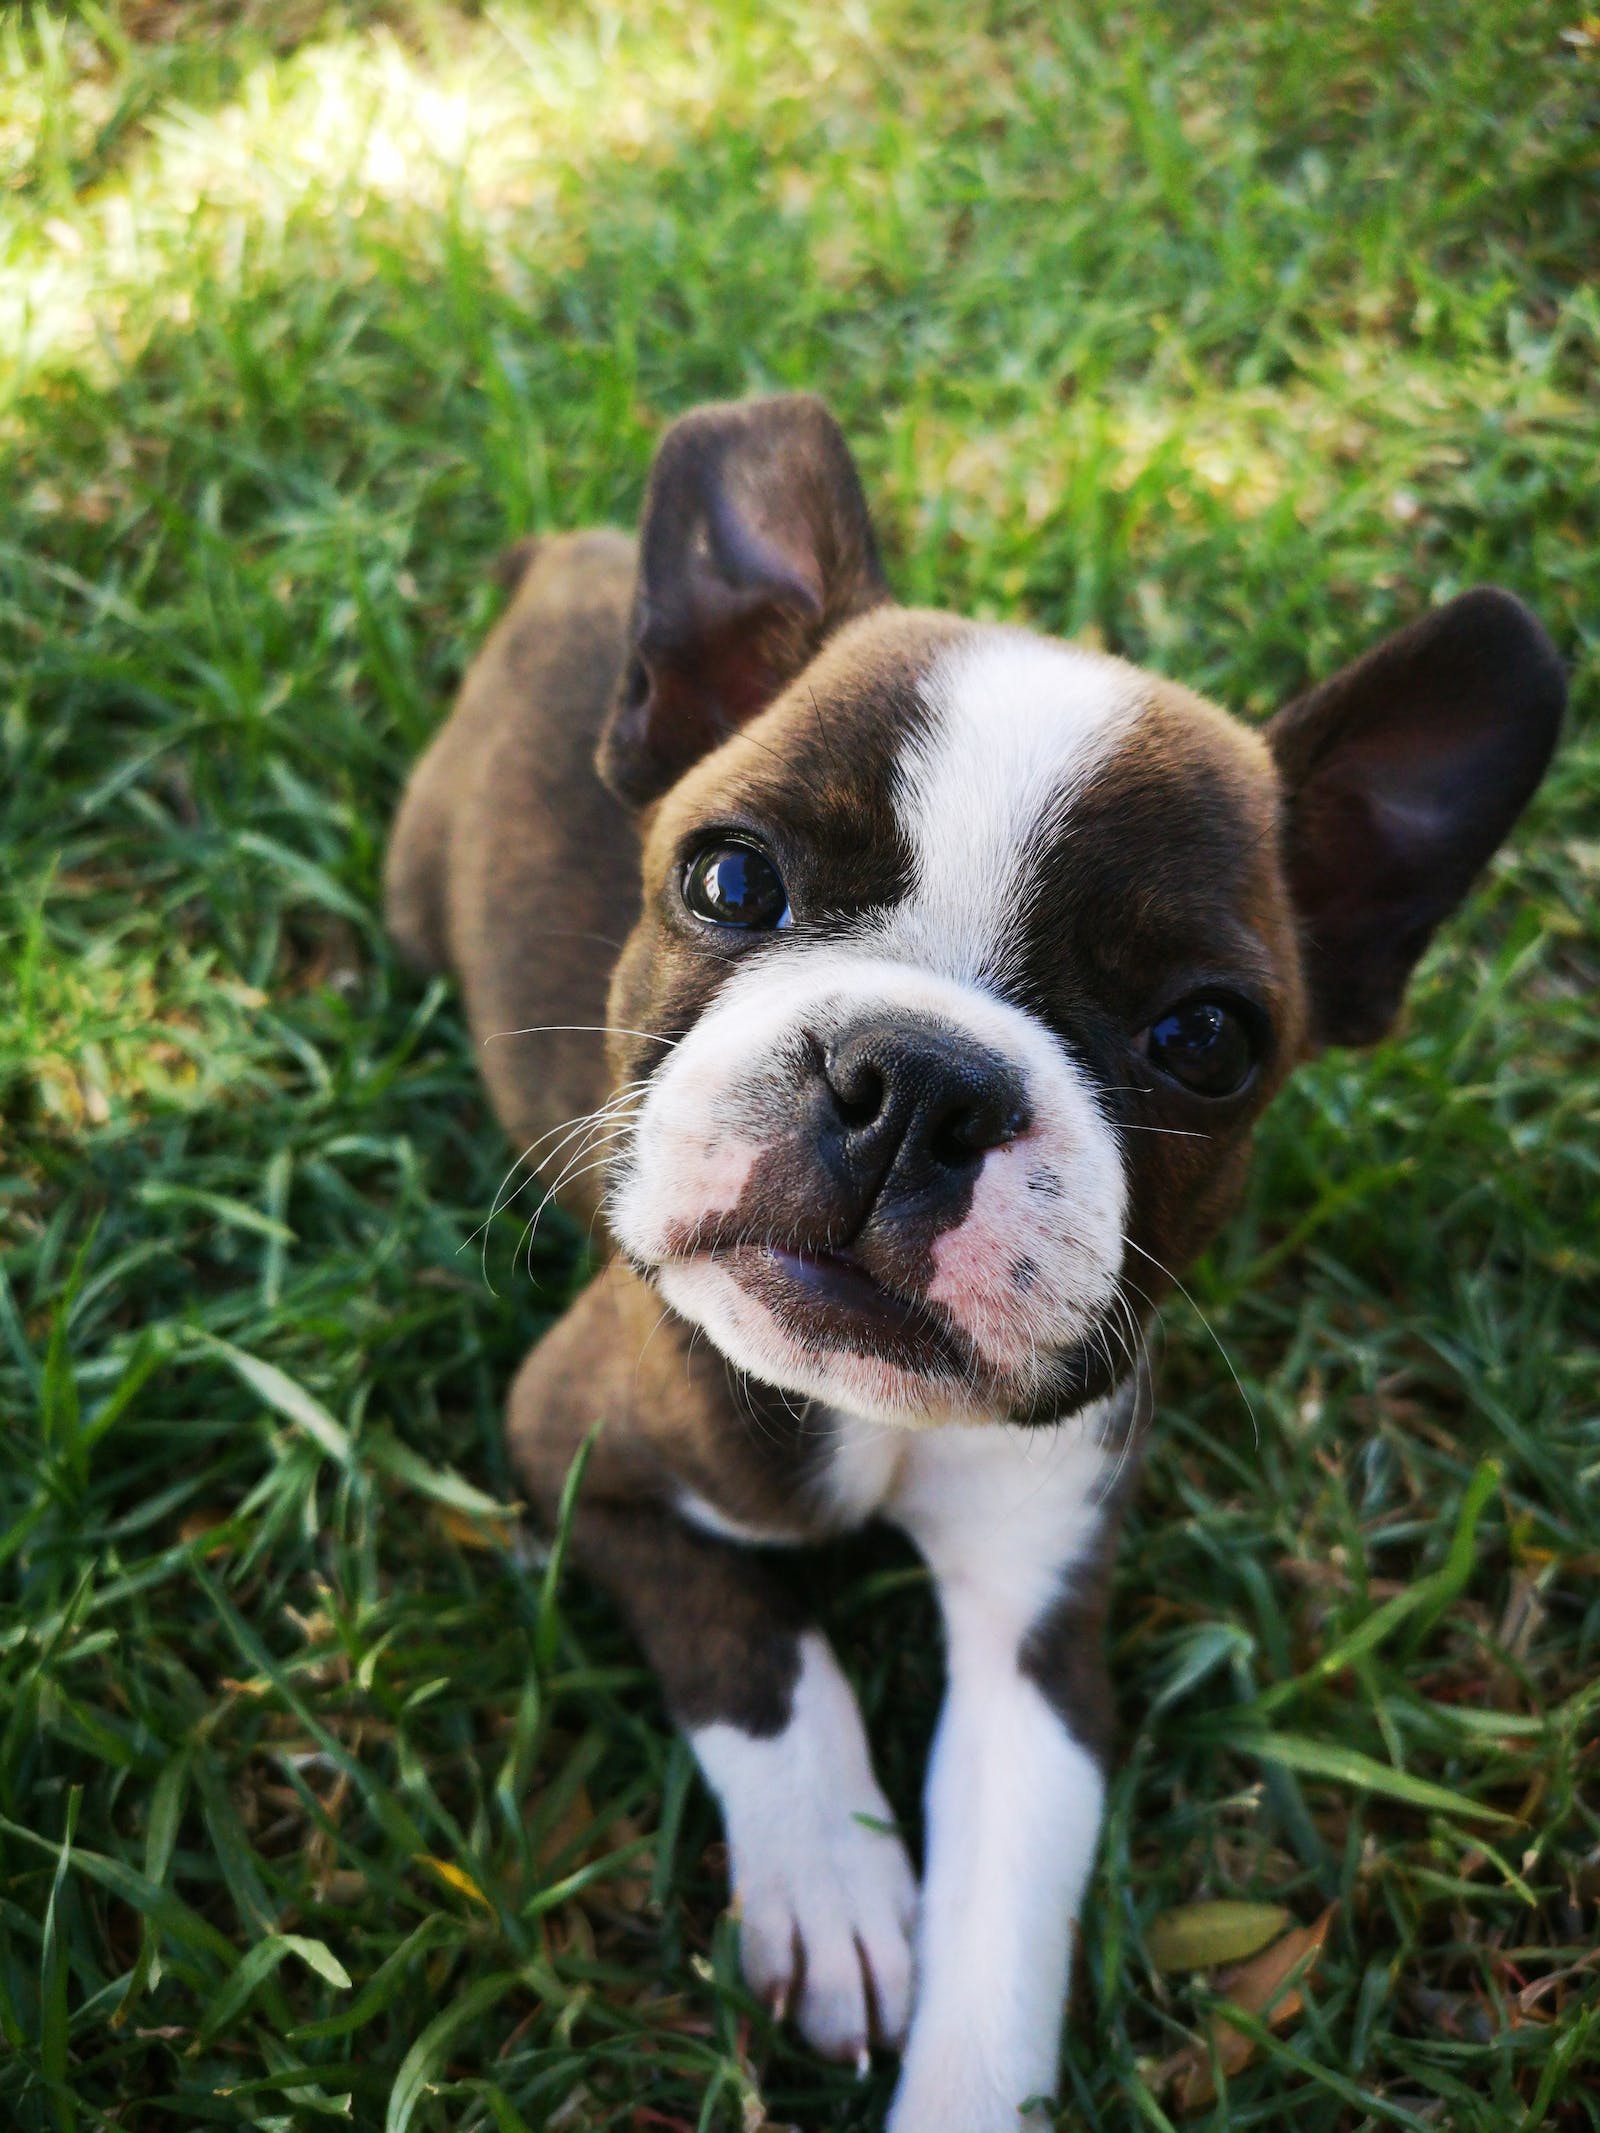 Cute dog laying on grass looking up